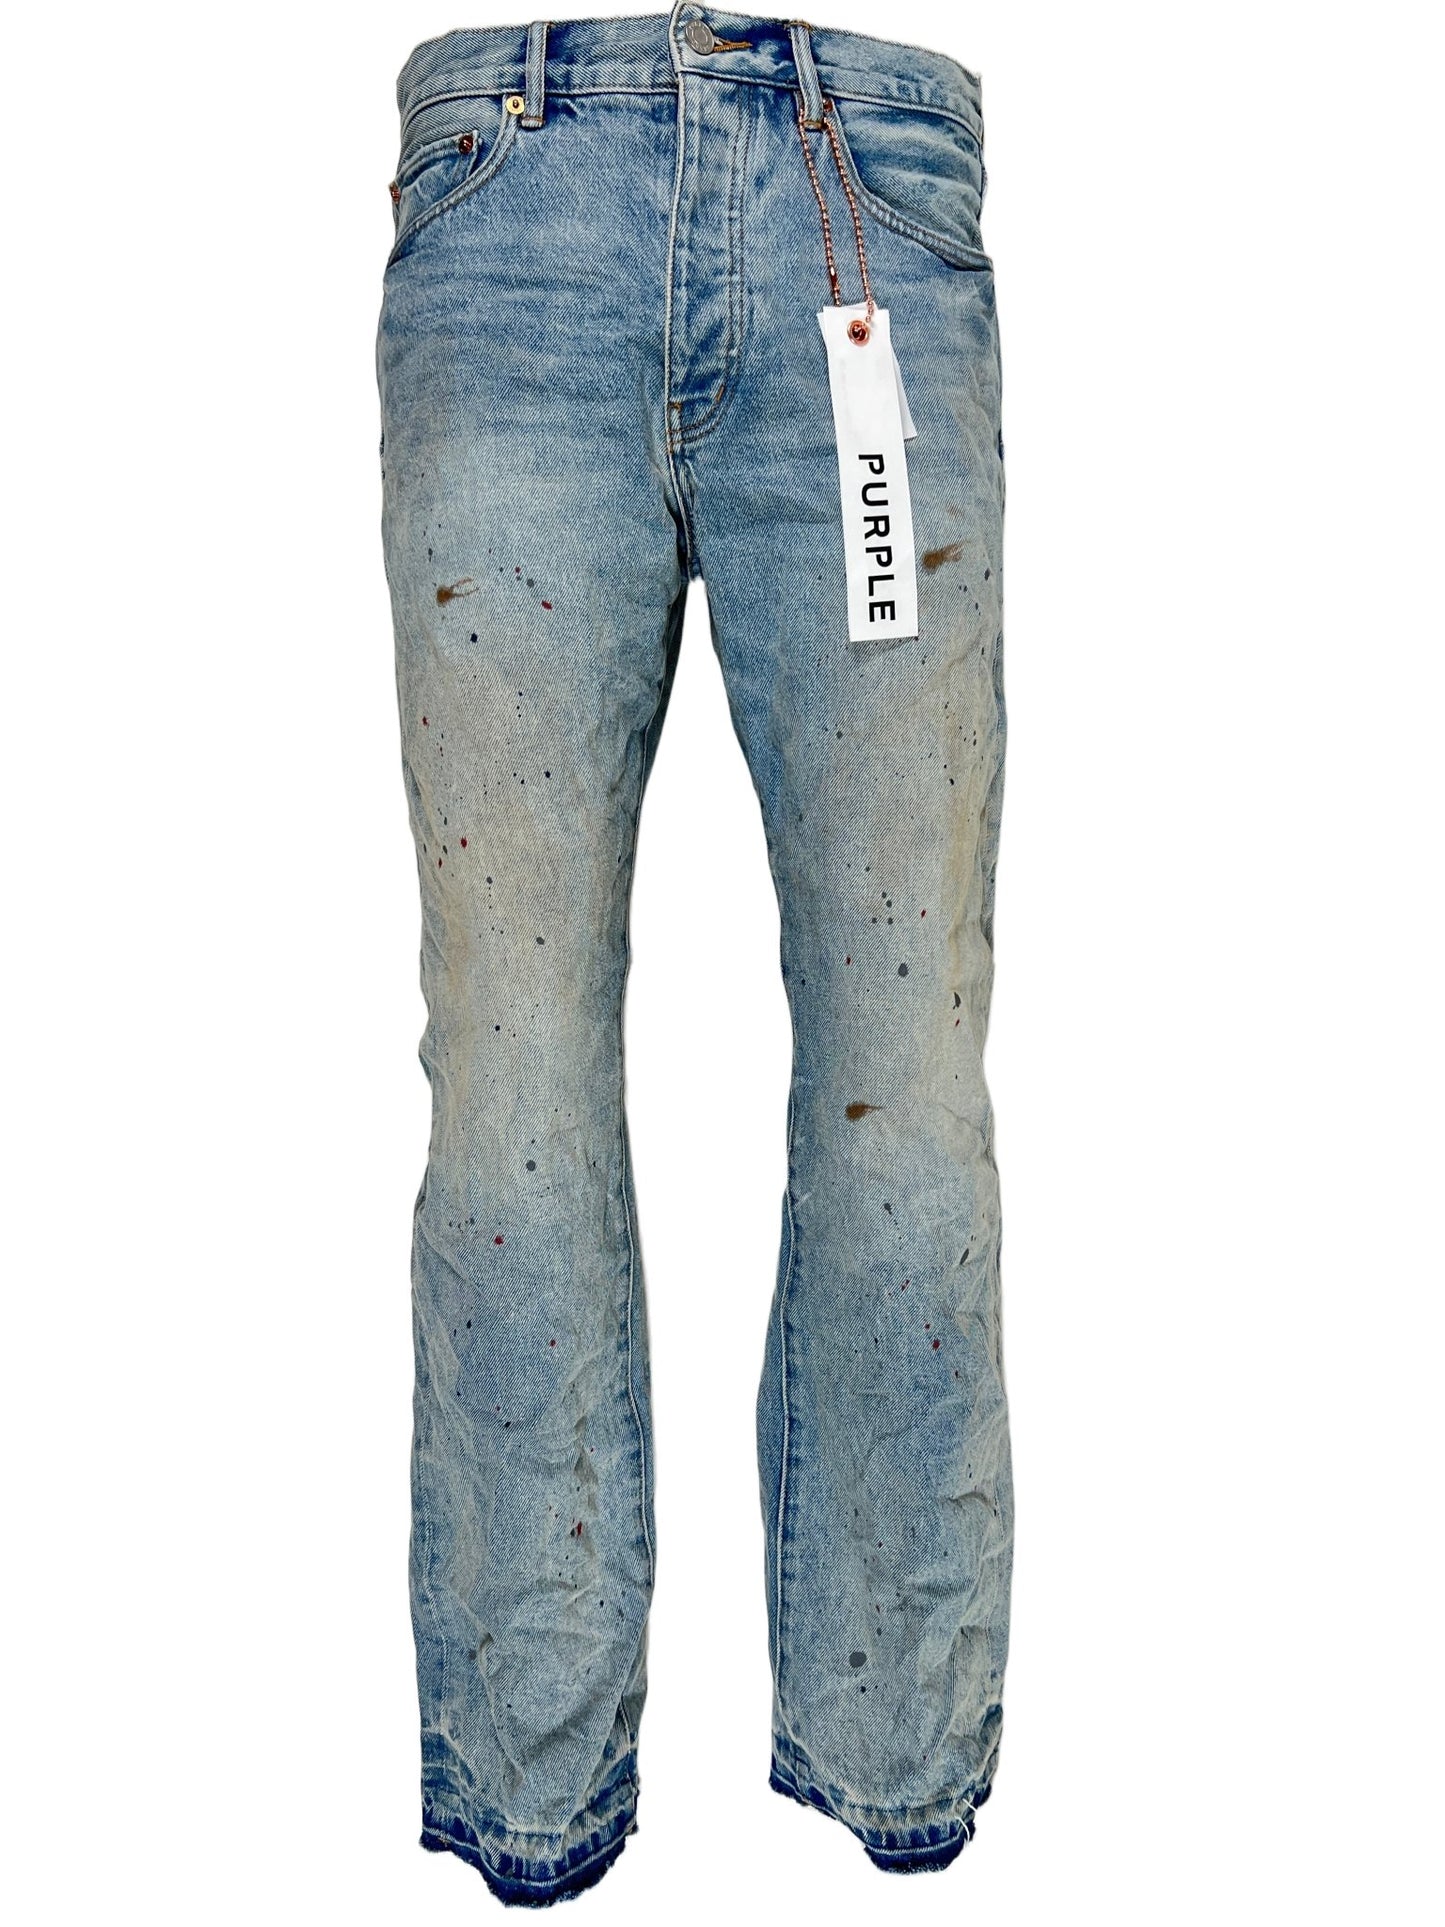 A pair of PURPLE BRAND JEANS P011-VDPI VINTAGE DARTY PAINTED LT INDIGO with a tag on them.